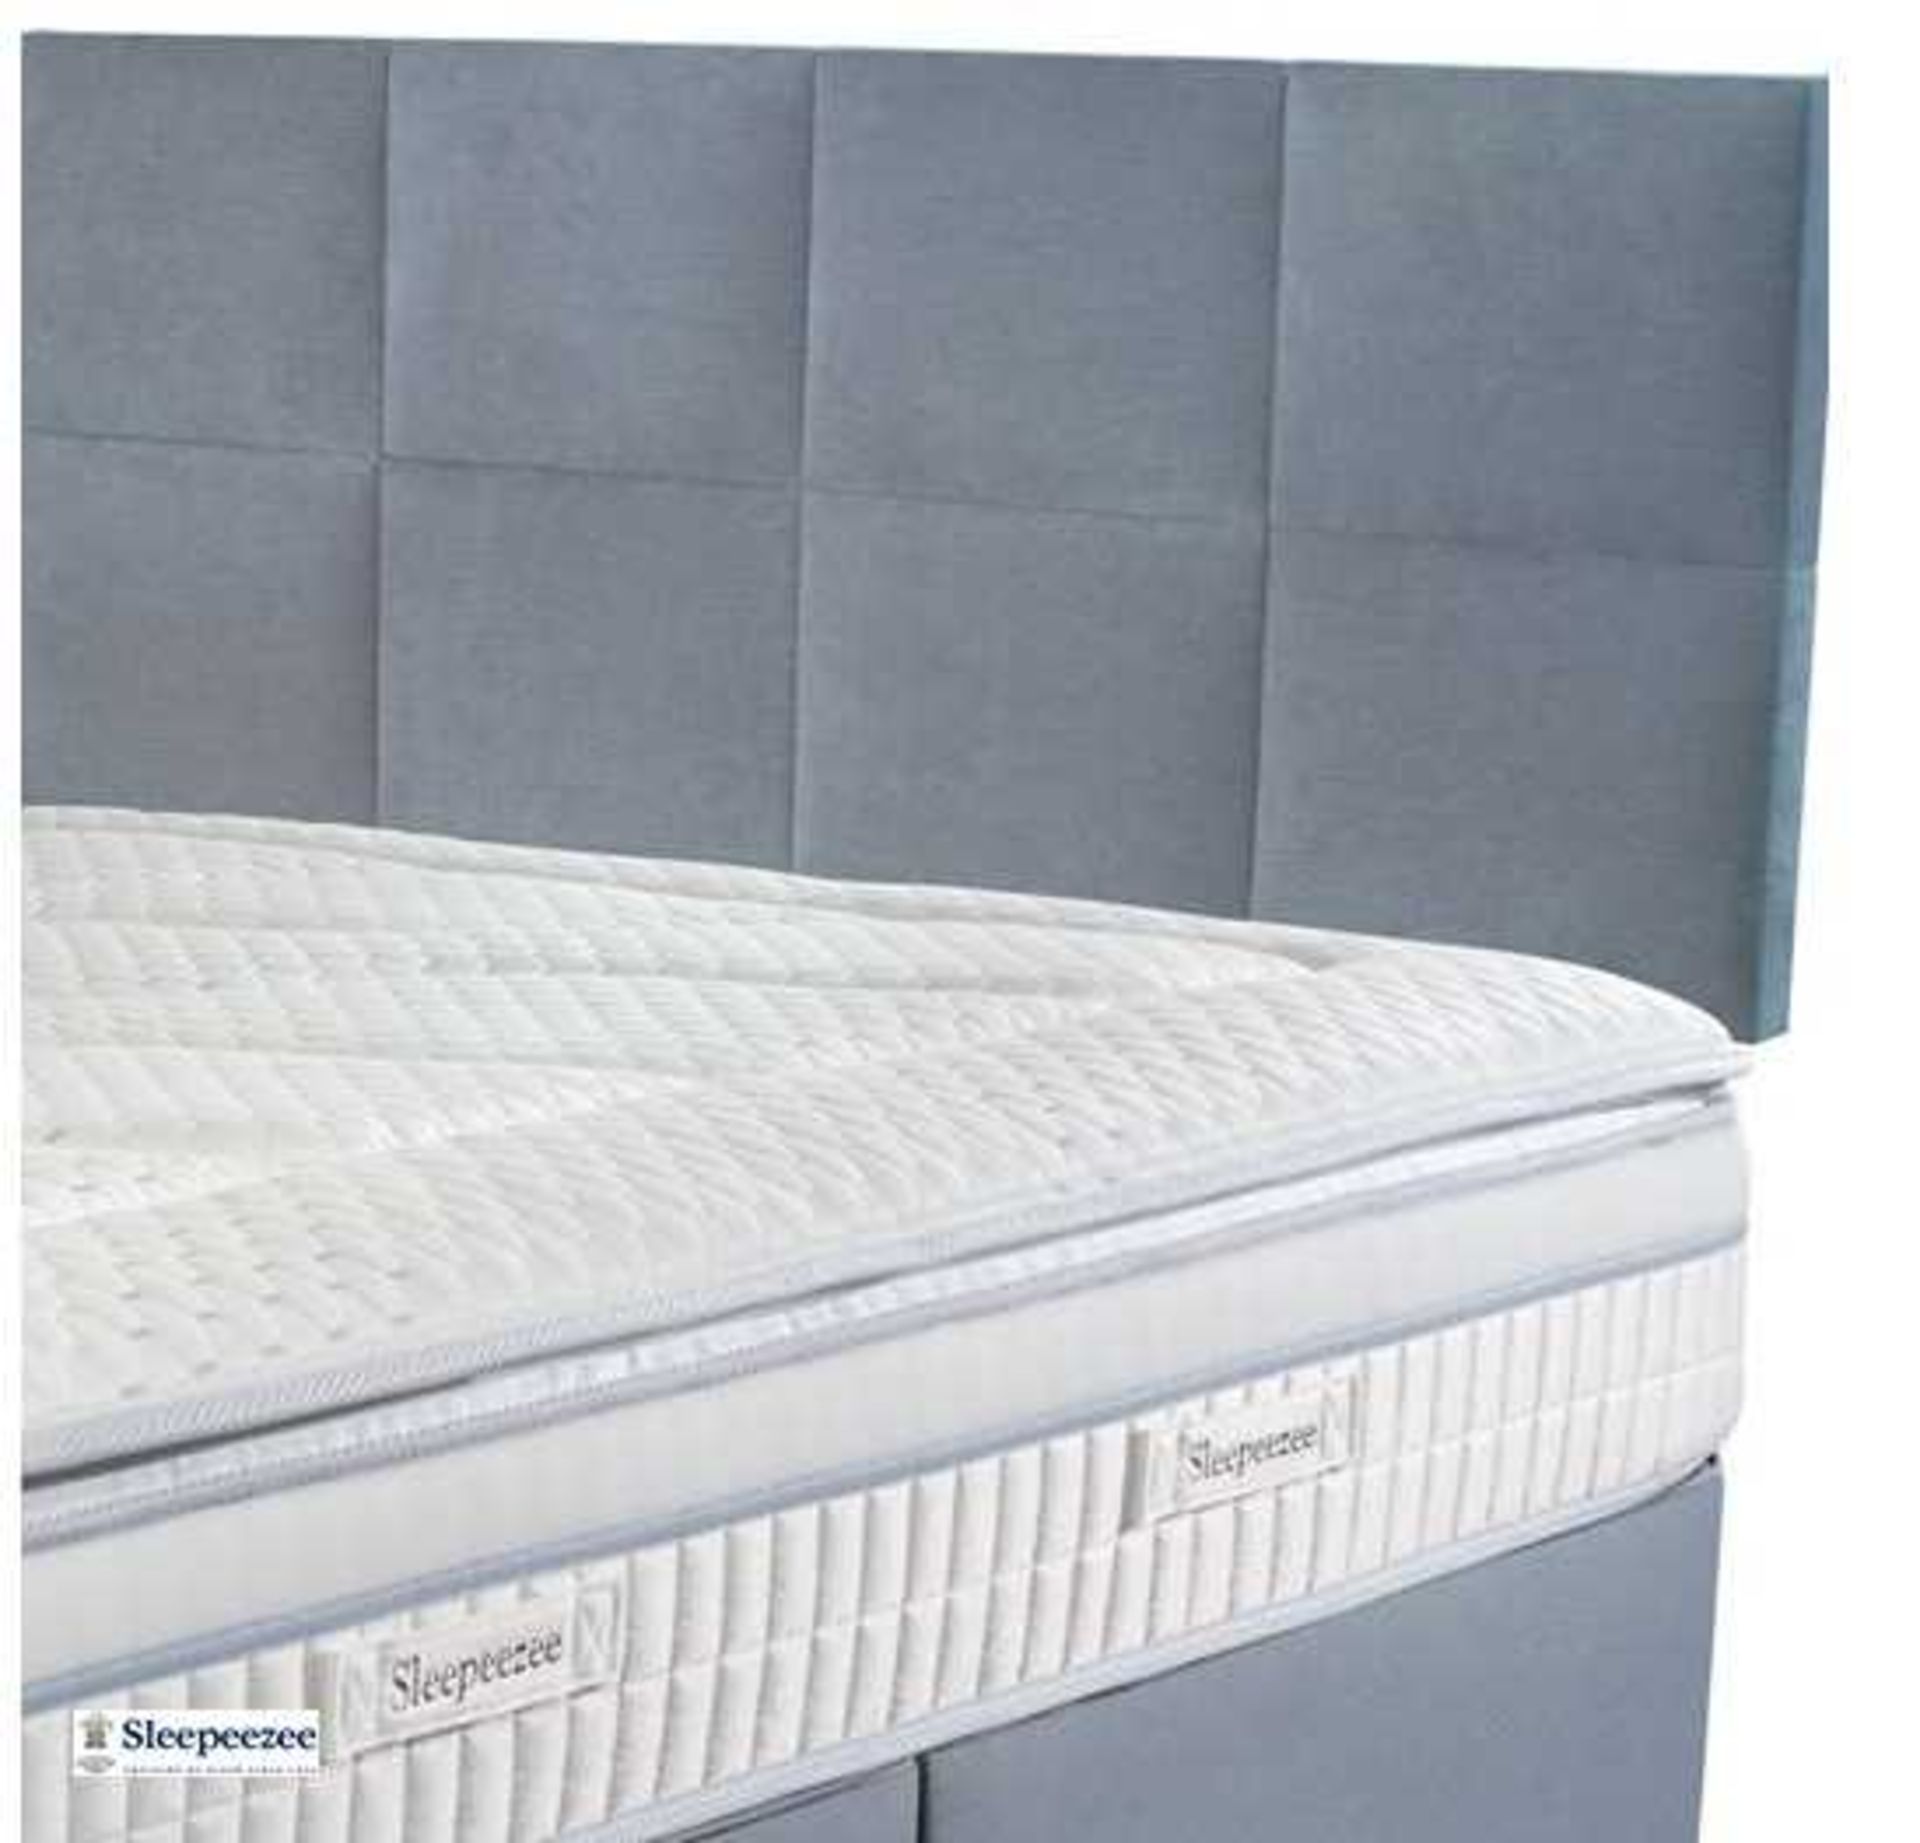 | 1X | SLEEPEEZEE MONTANA HEADBOARD 4FT6 DOUBLE PEWTER | GOOD CONDITION PACKAGED | RRP ?299 |